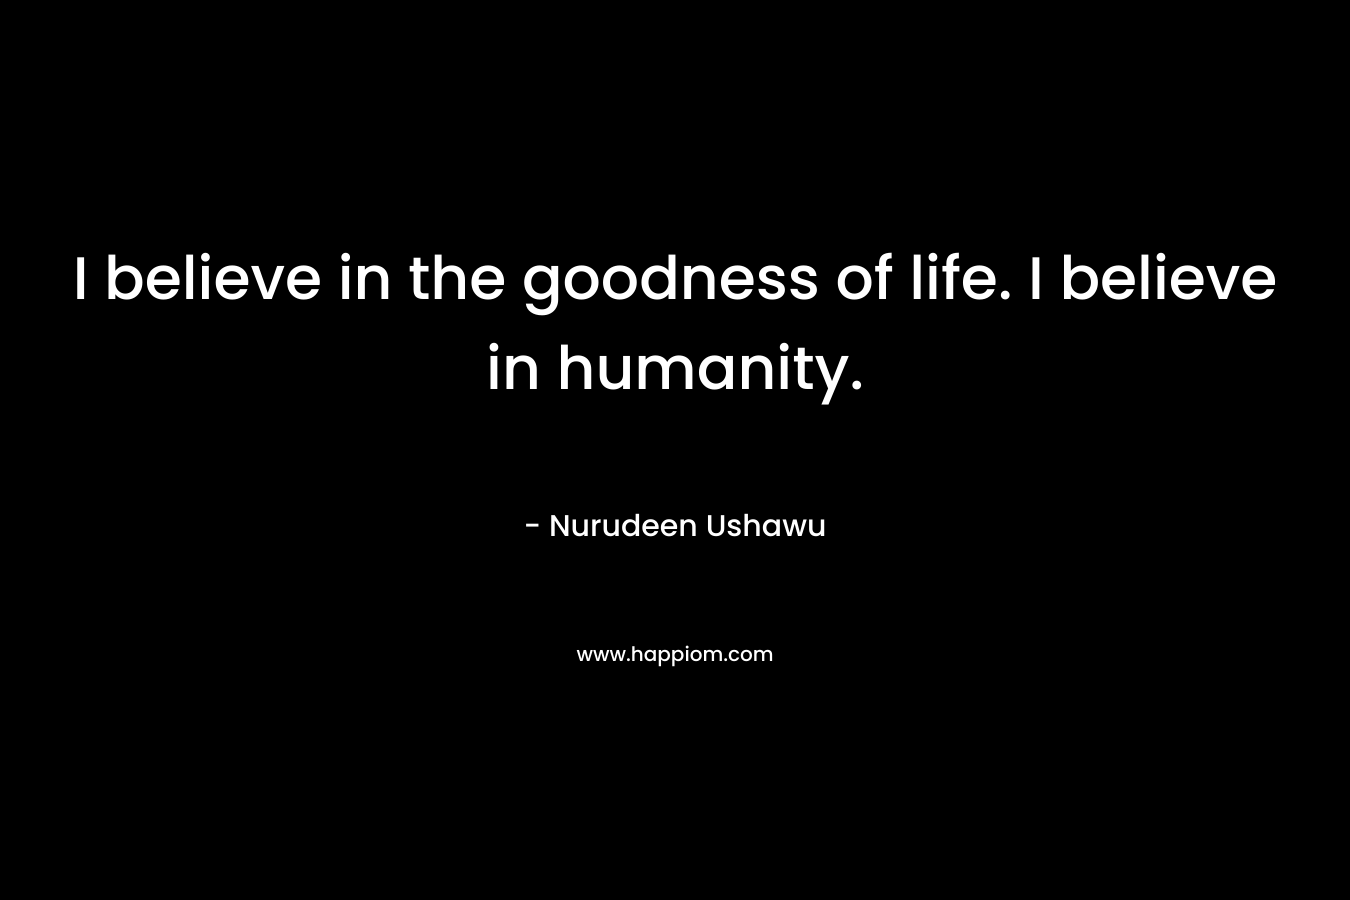 I believe in the goodness of life. I believe in humanity.